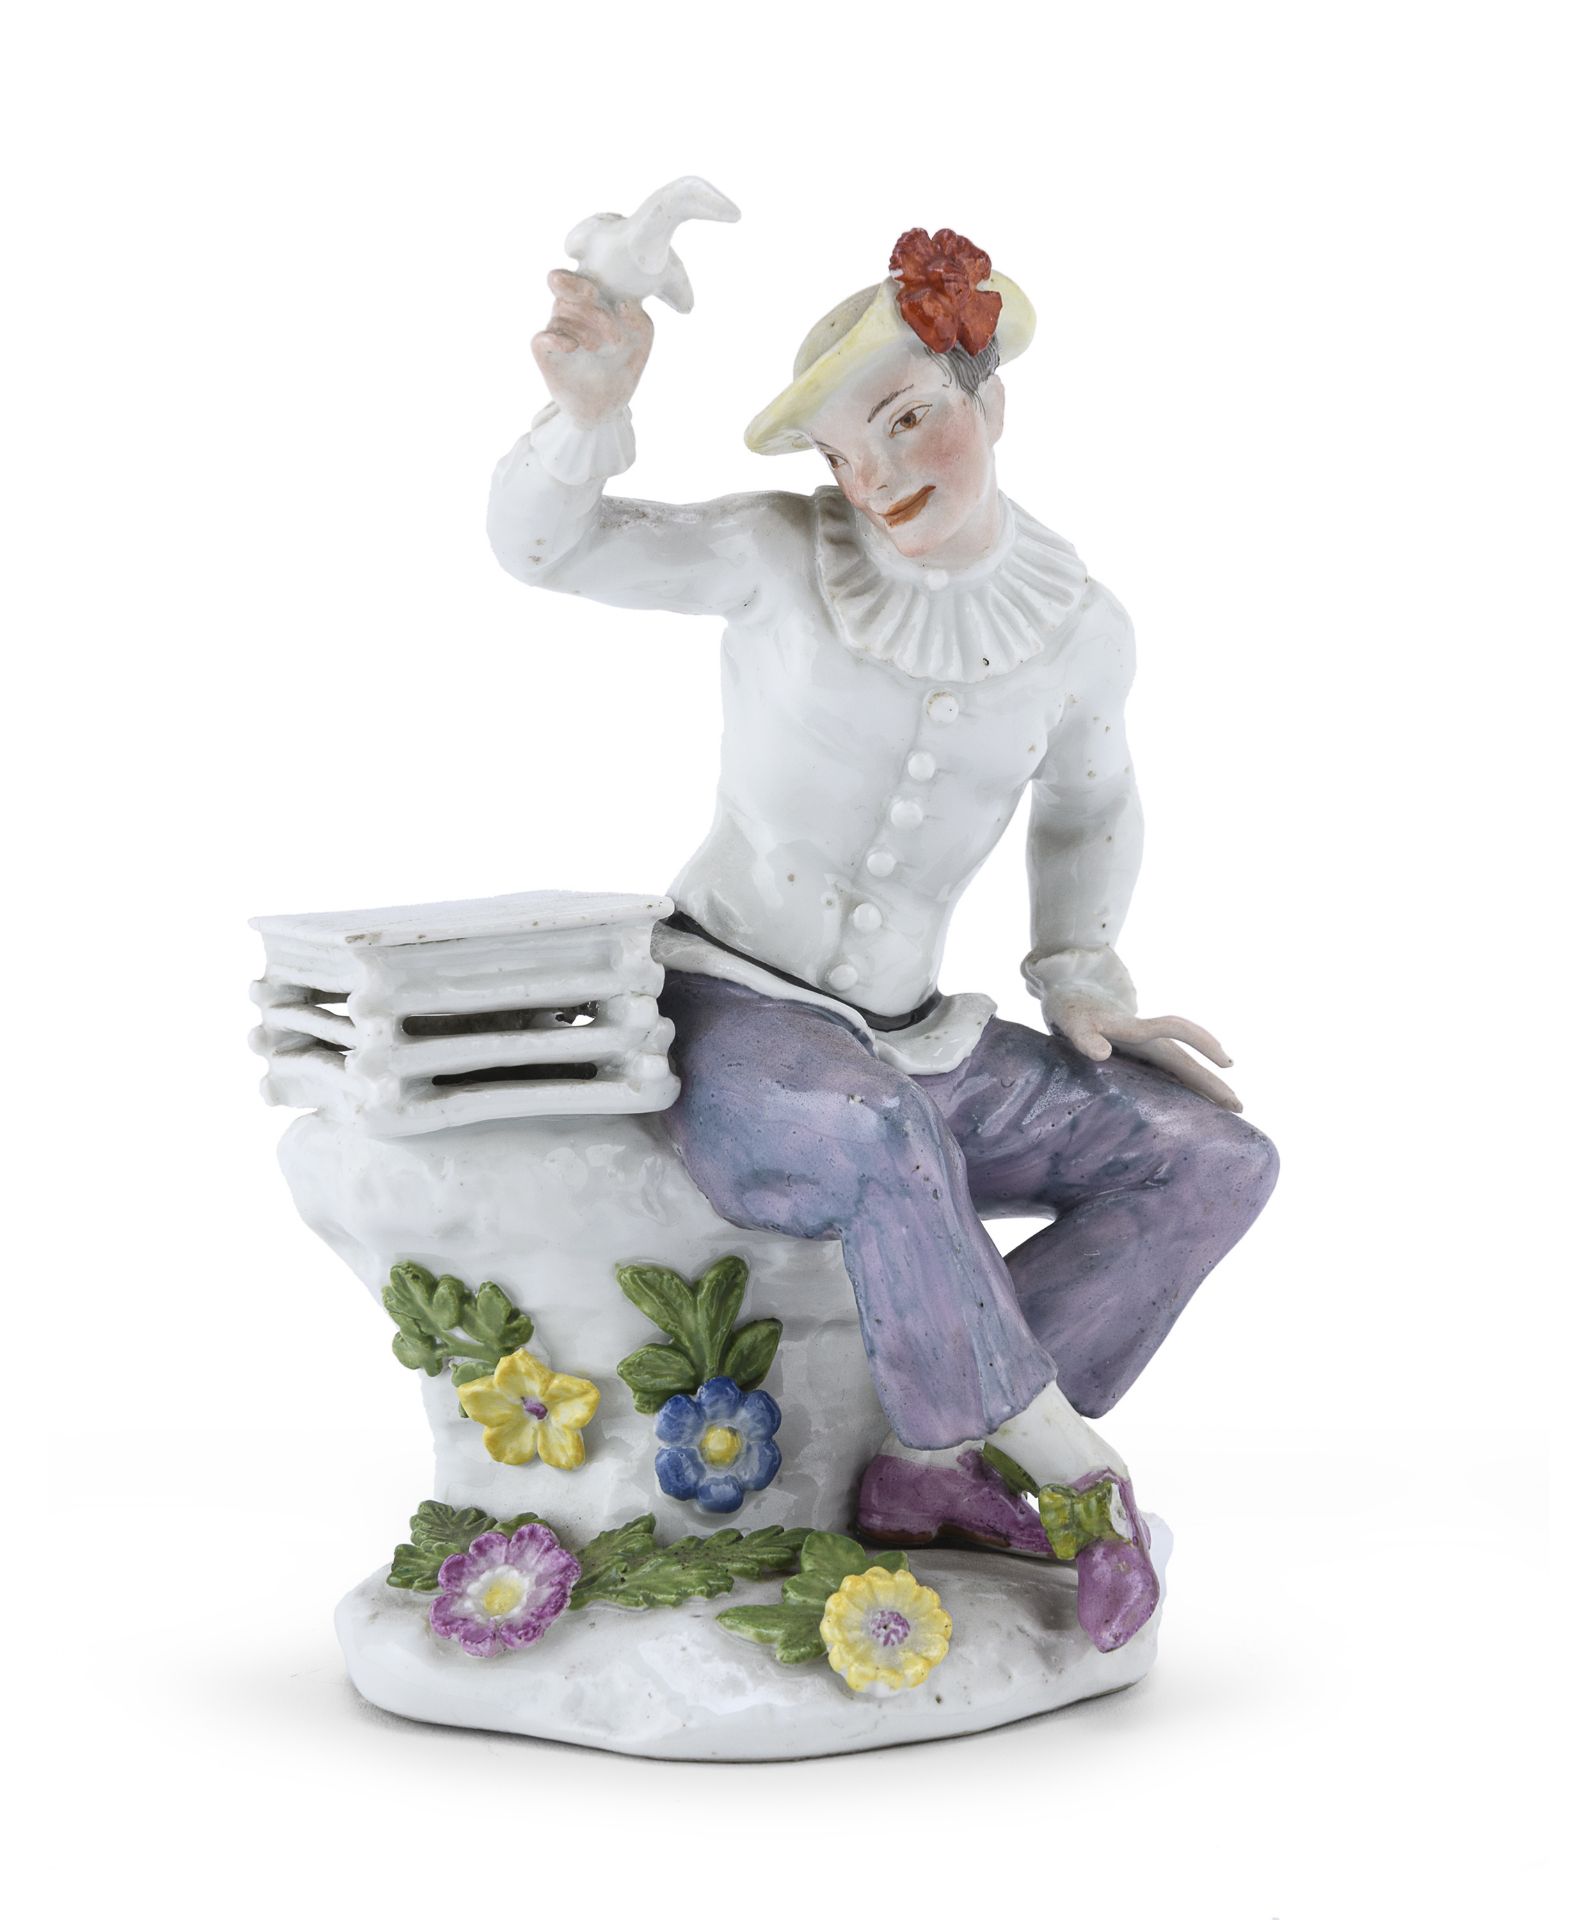 SMALL PORCELAIN GROUP MEISSEN 18TH CENTURY